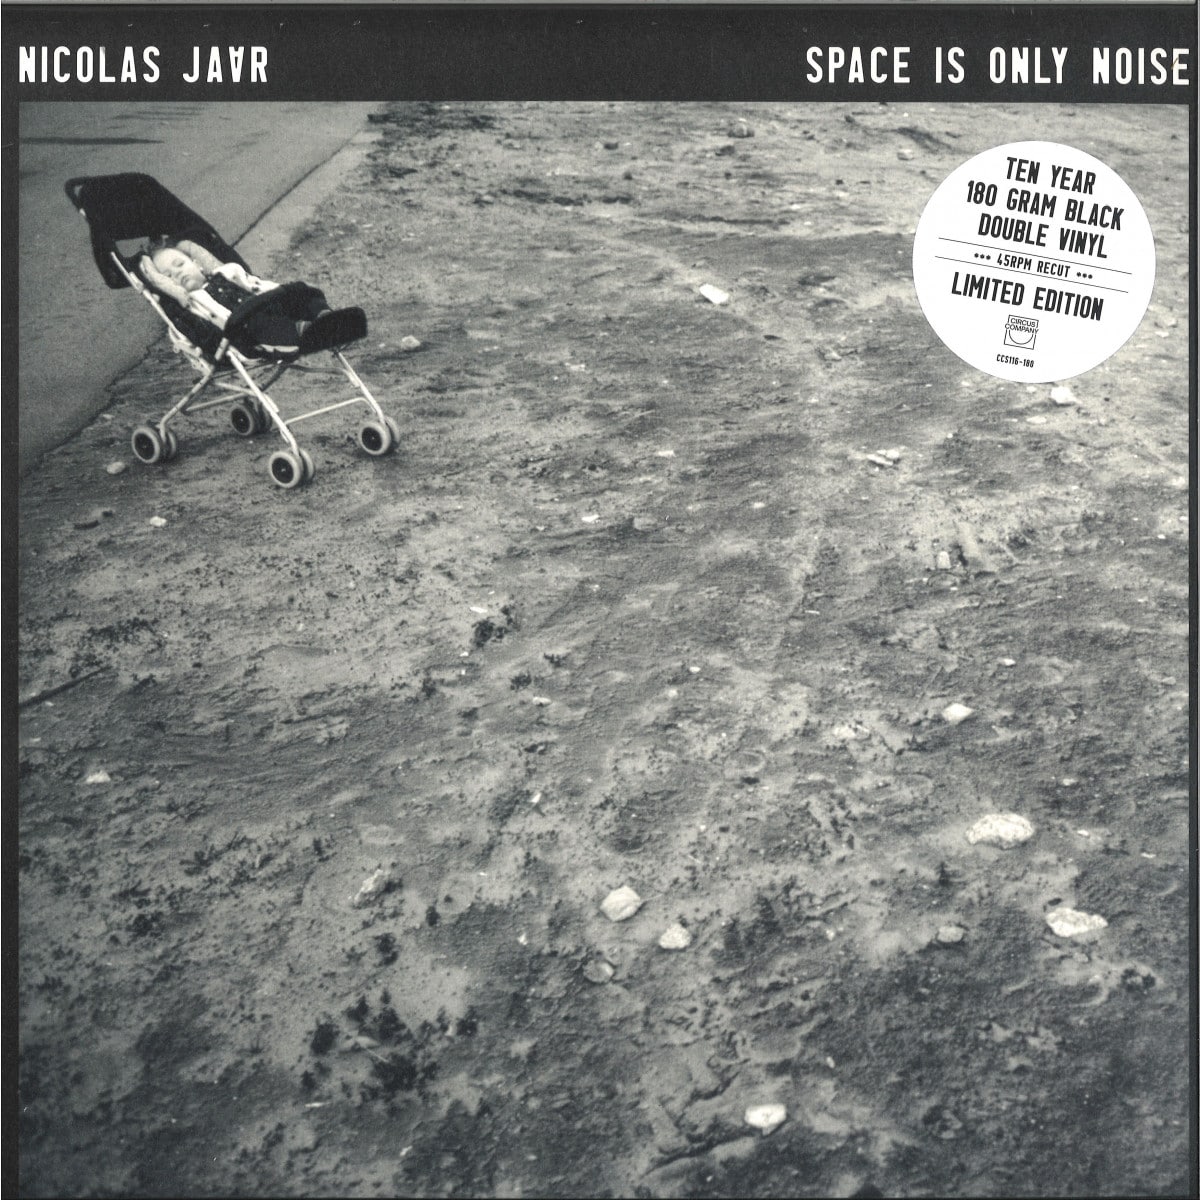 Nicolas Jaar - Space Is Only Noise (Ten Year Edition) 2 - CCS116-180 - CIRCUS COMPANY